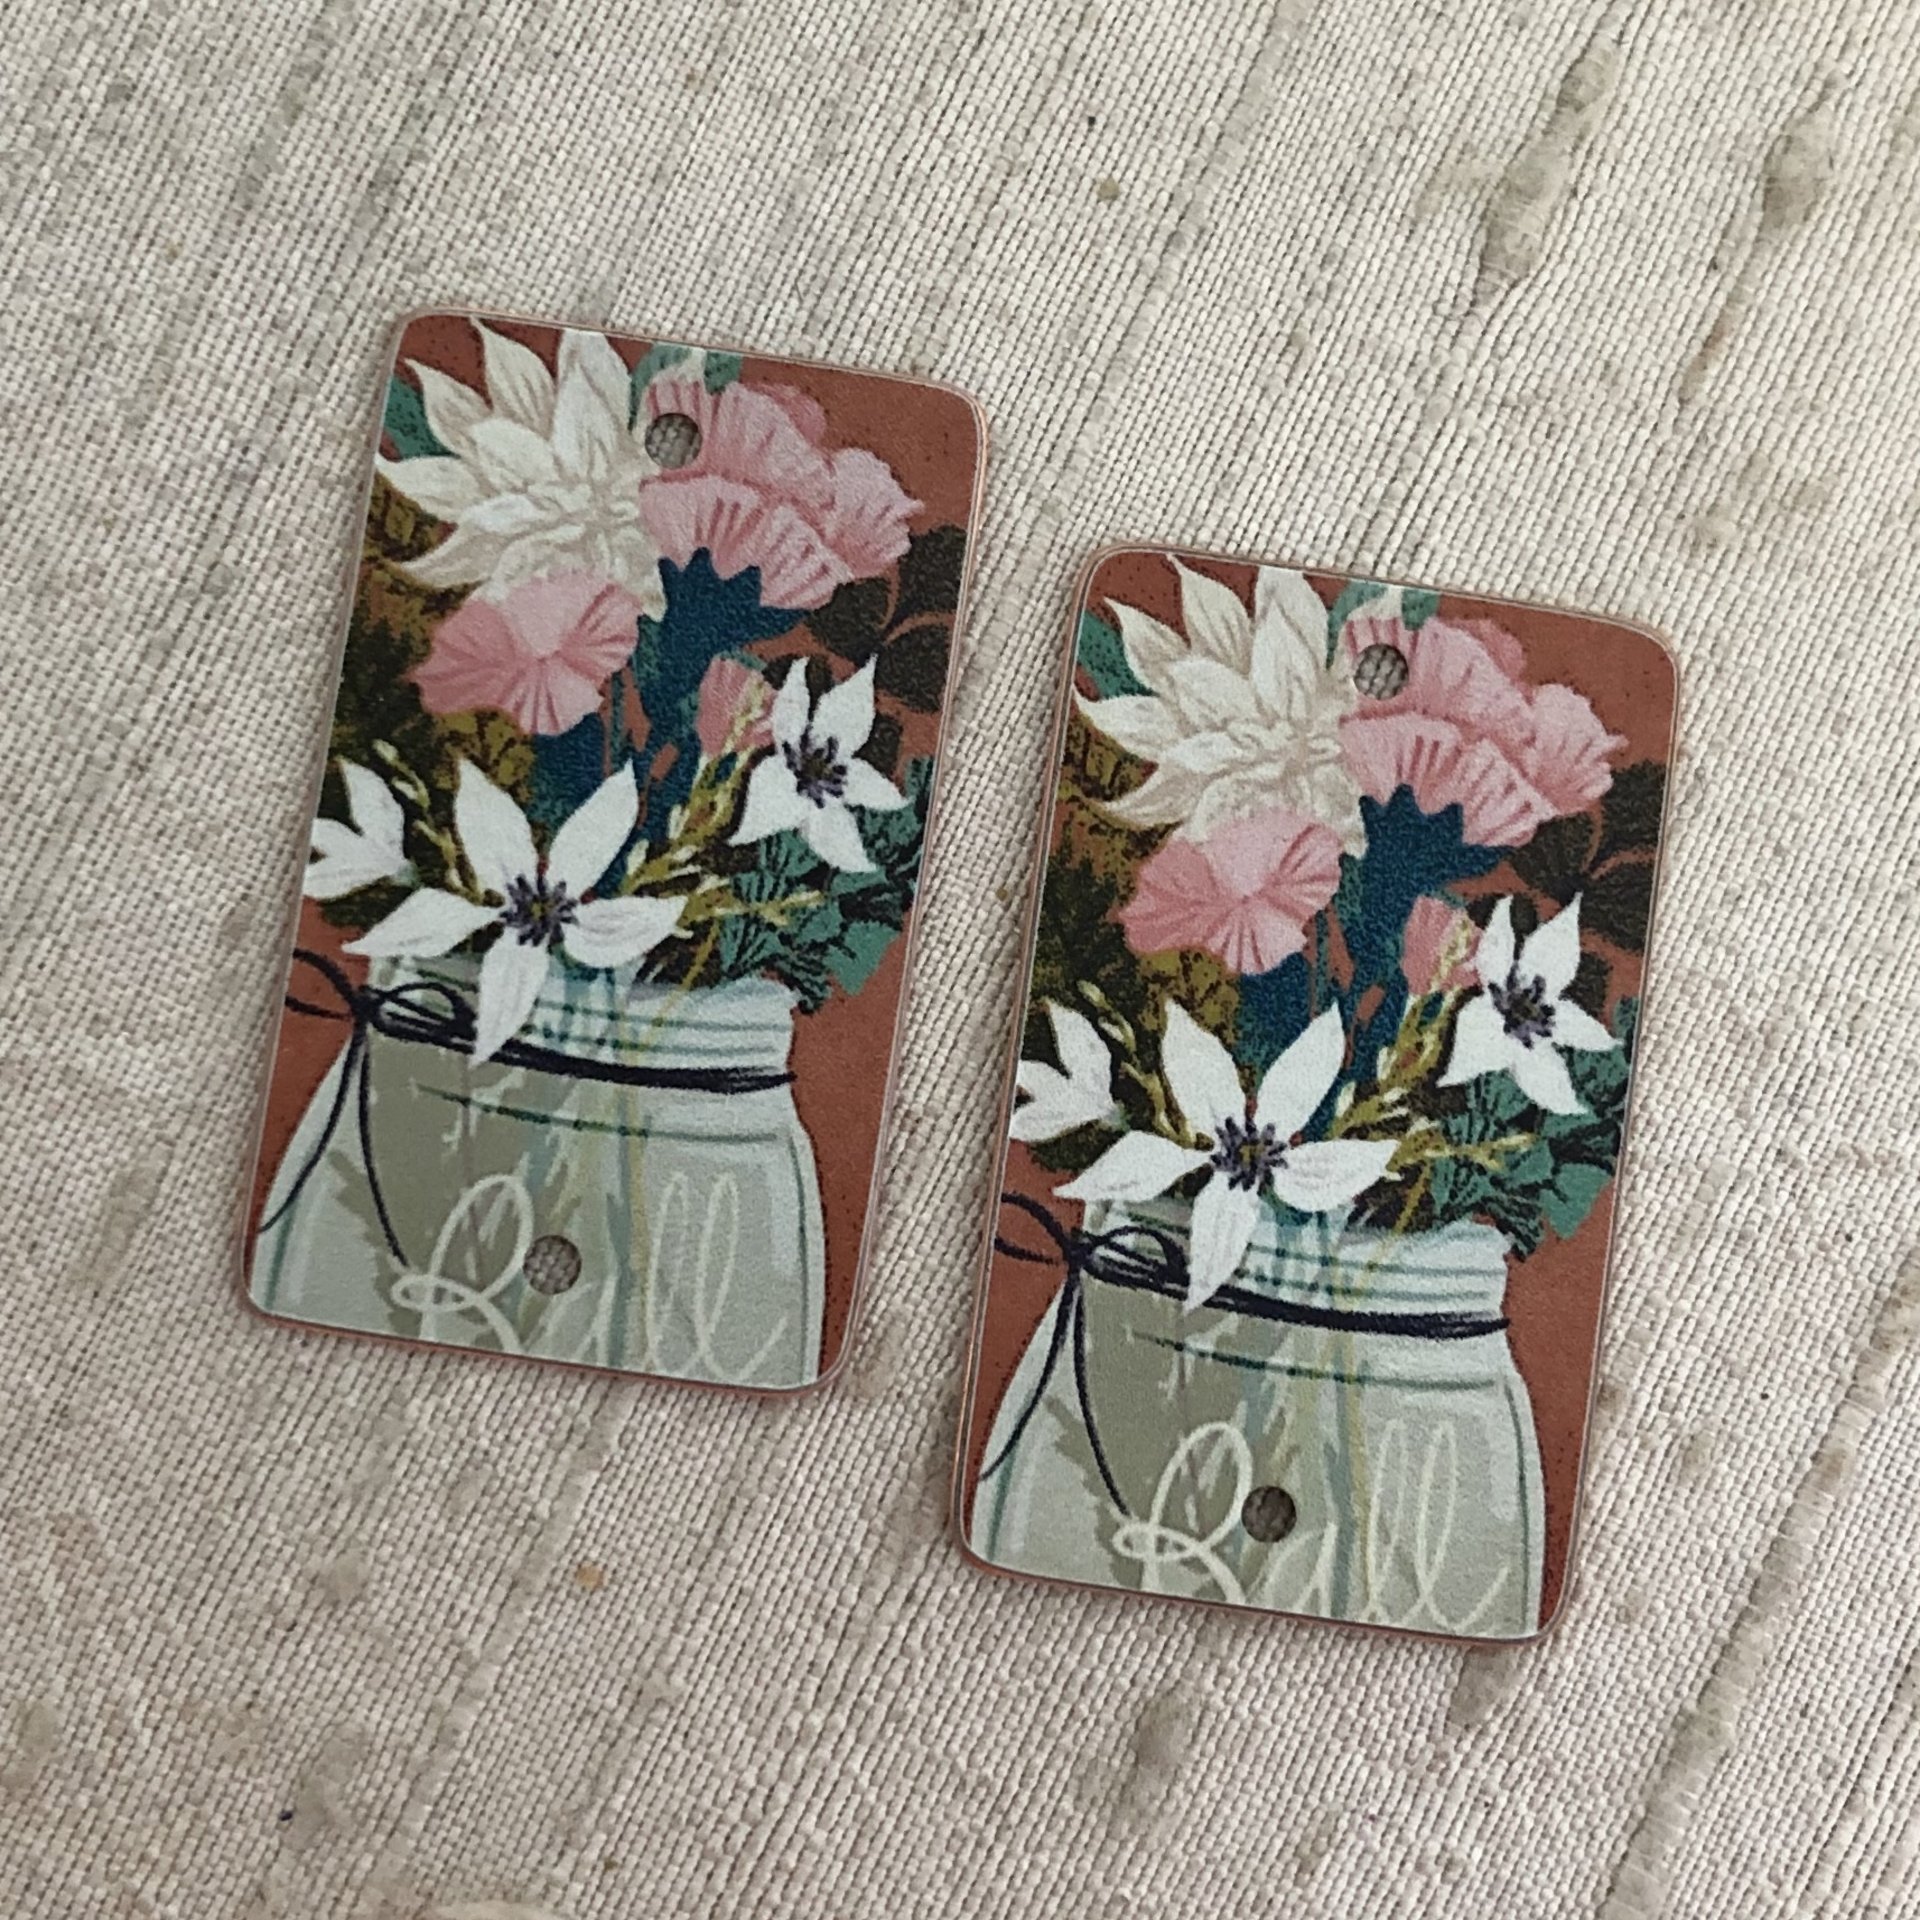 Faux Tin Workshop: The Fine Art of Image Transfers on Copper, May 18-19